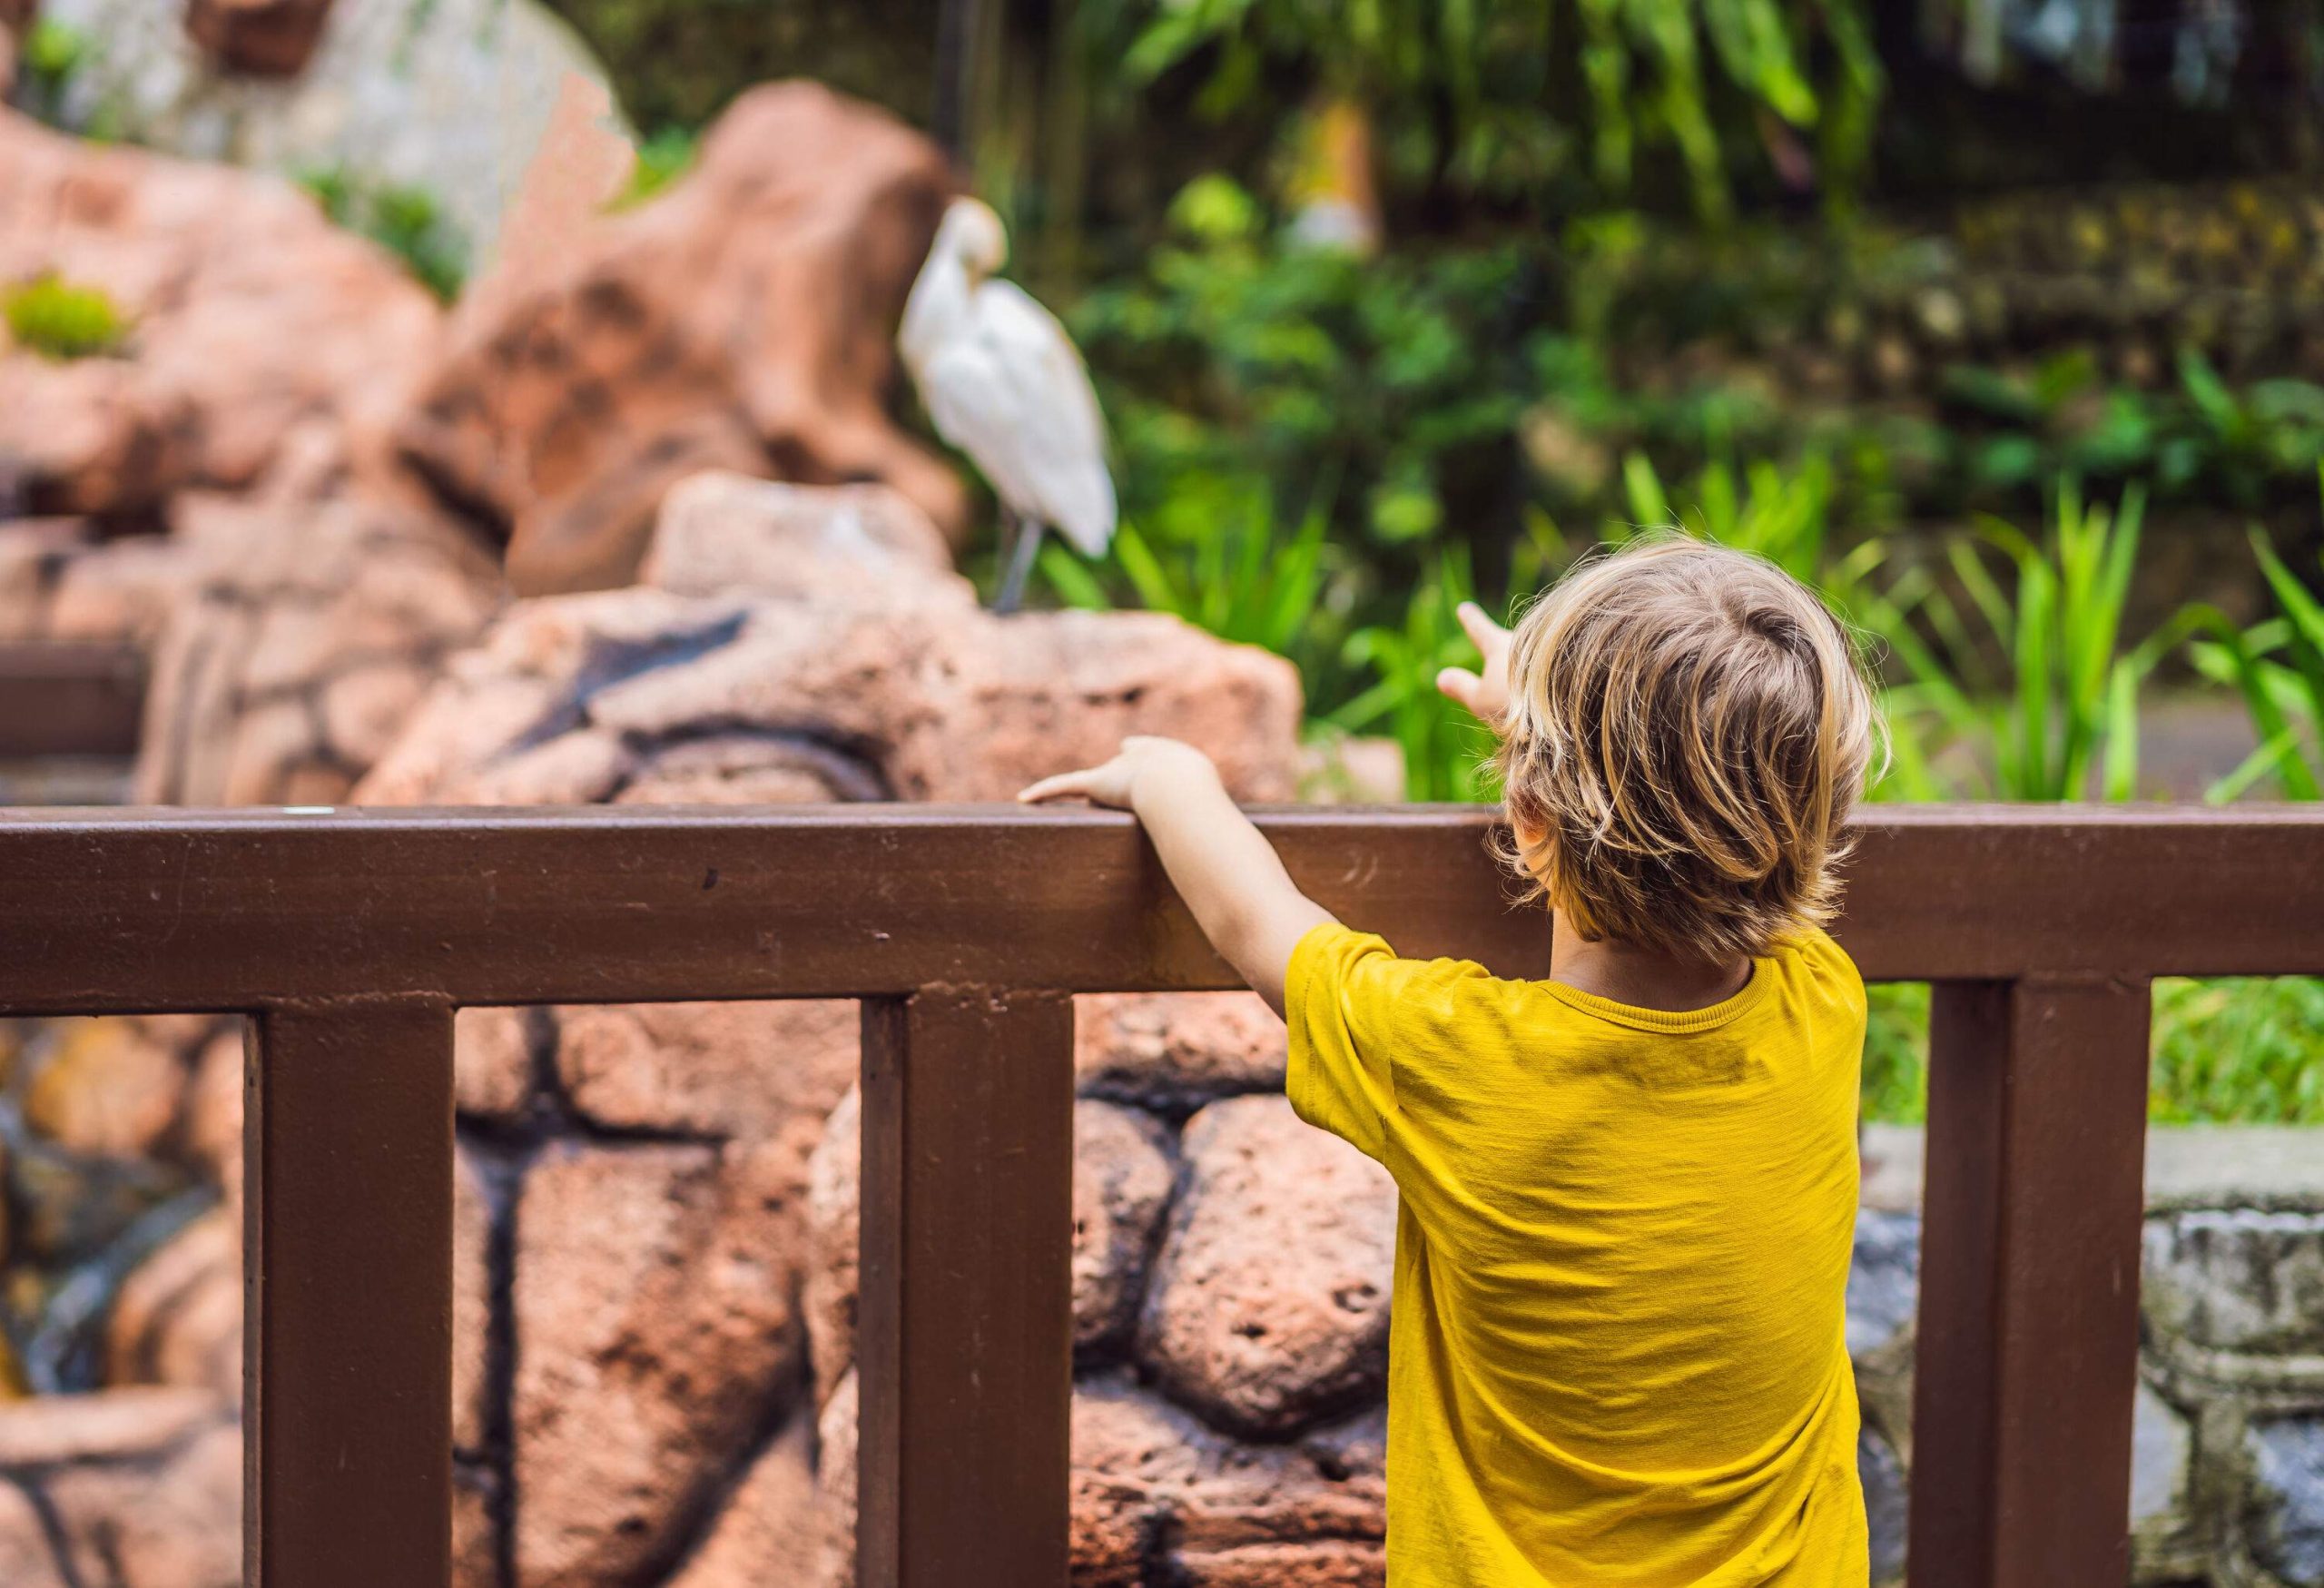 A curious boy gazes at the diverse array of birds from behind a guardrail at an aviary.